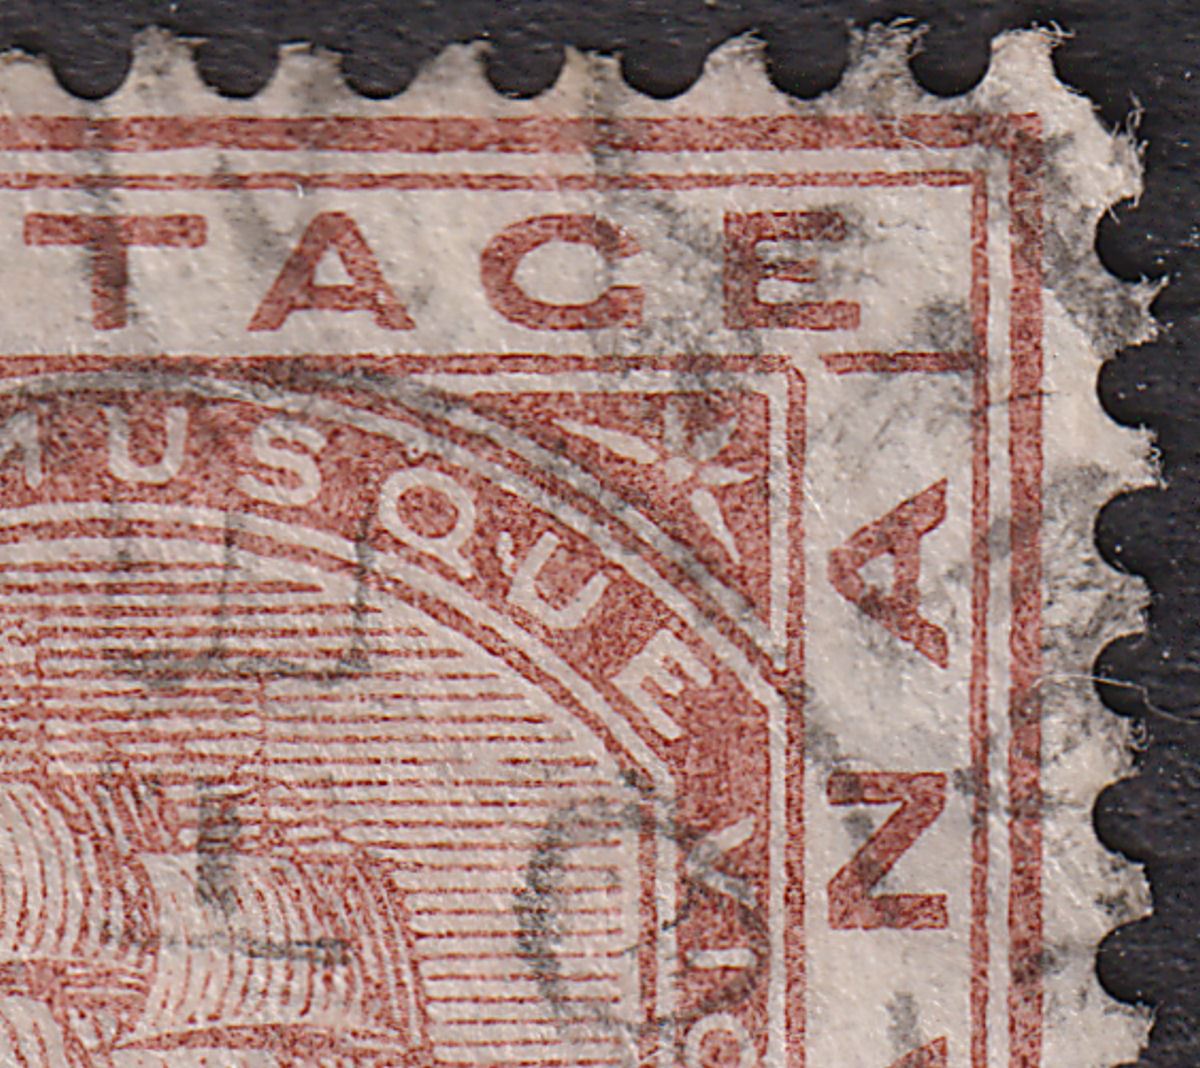 British Guiana 1876 QV 48c Red-Brown Used w Broken frame SG133a